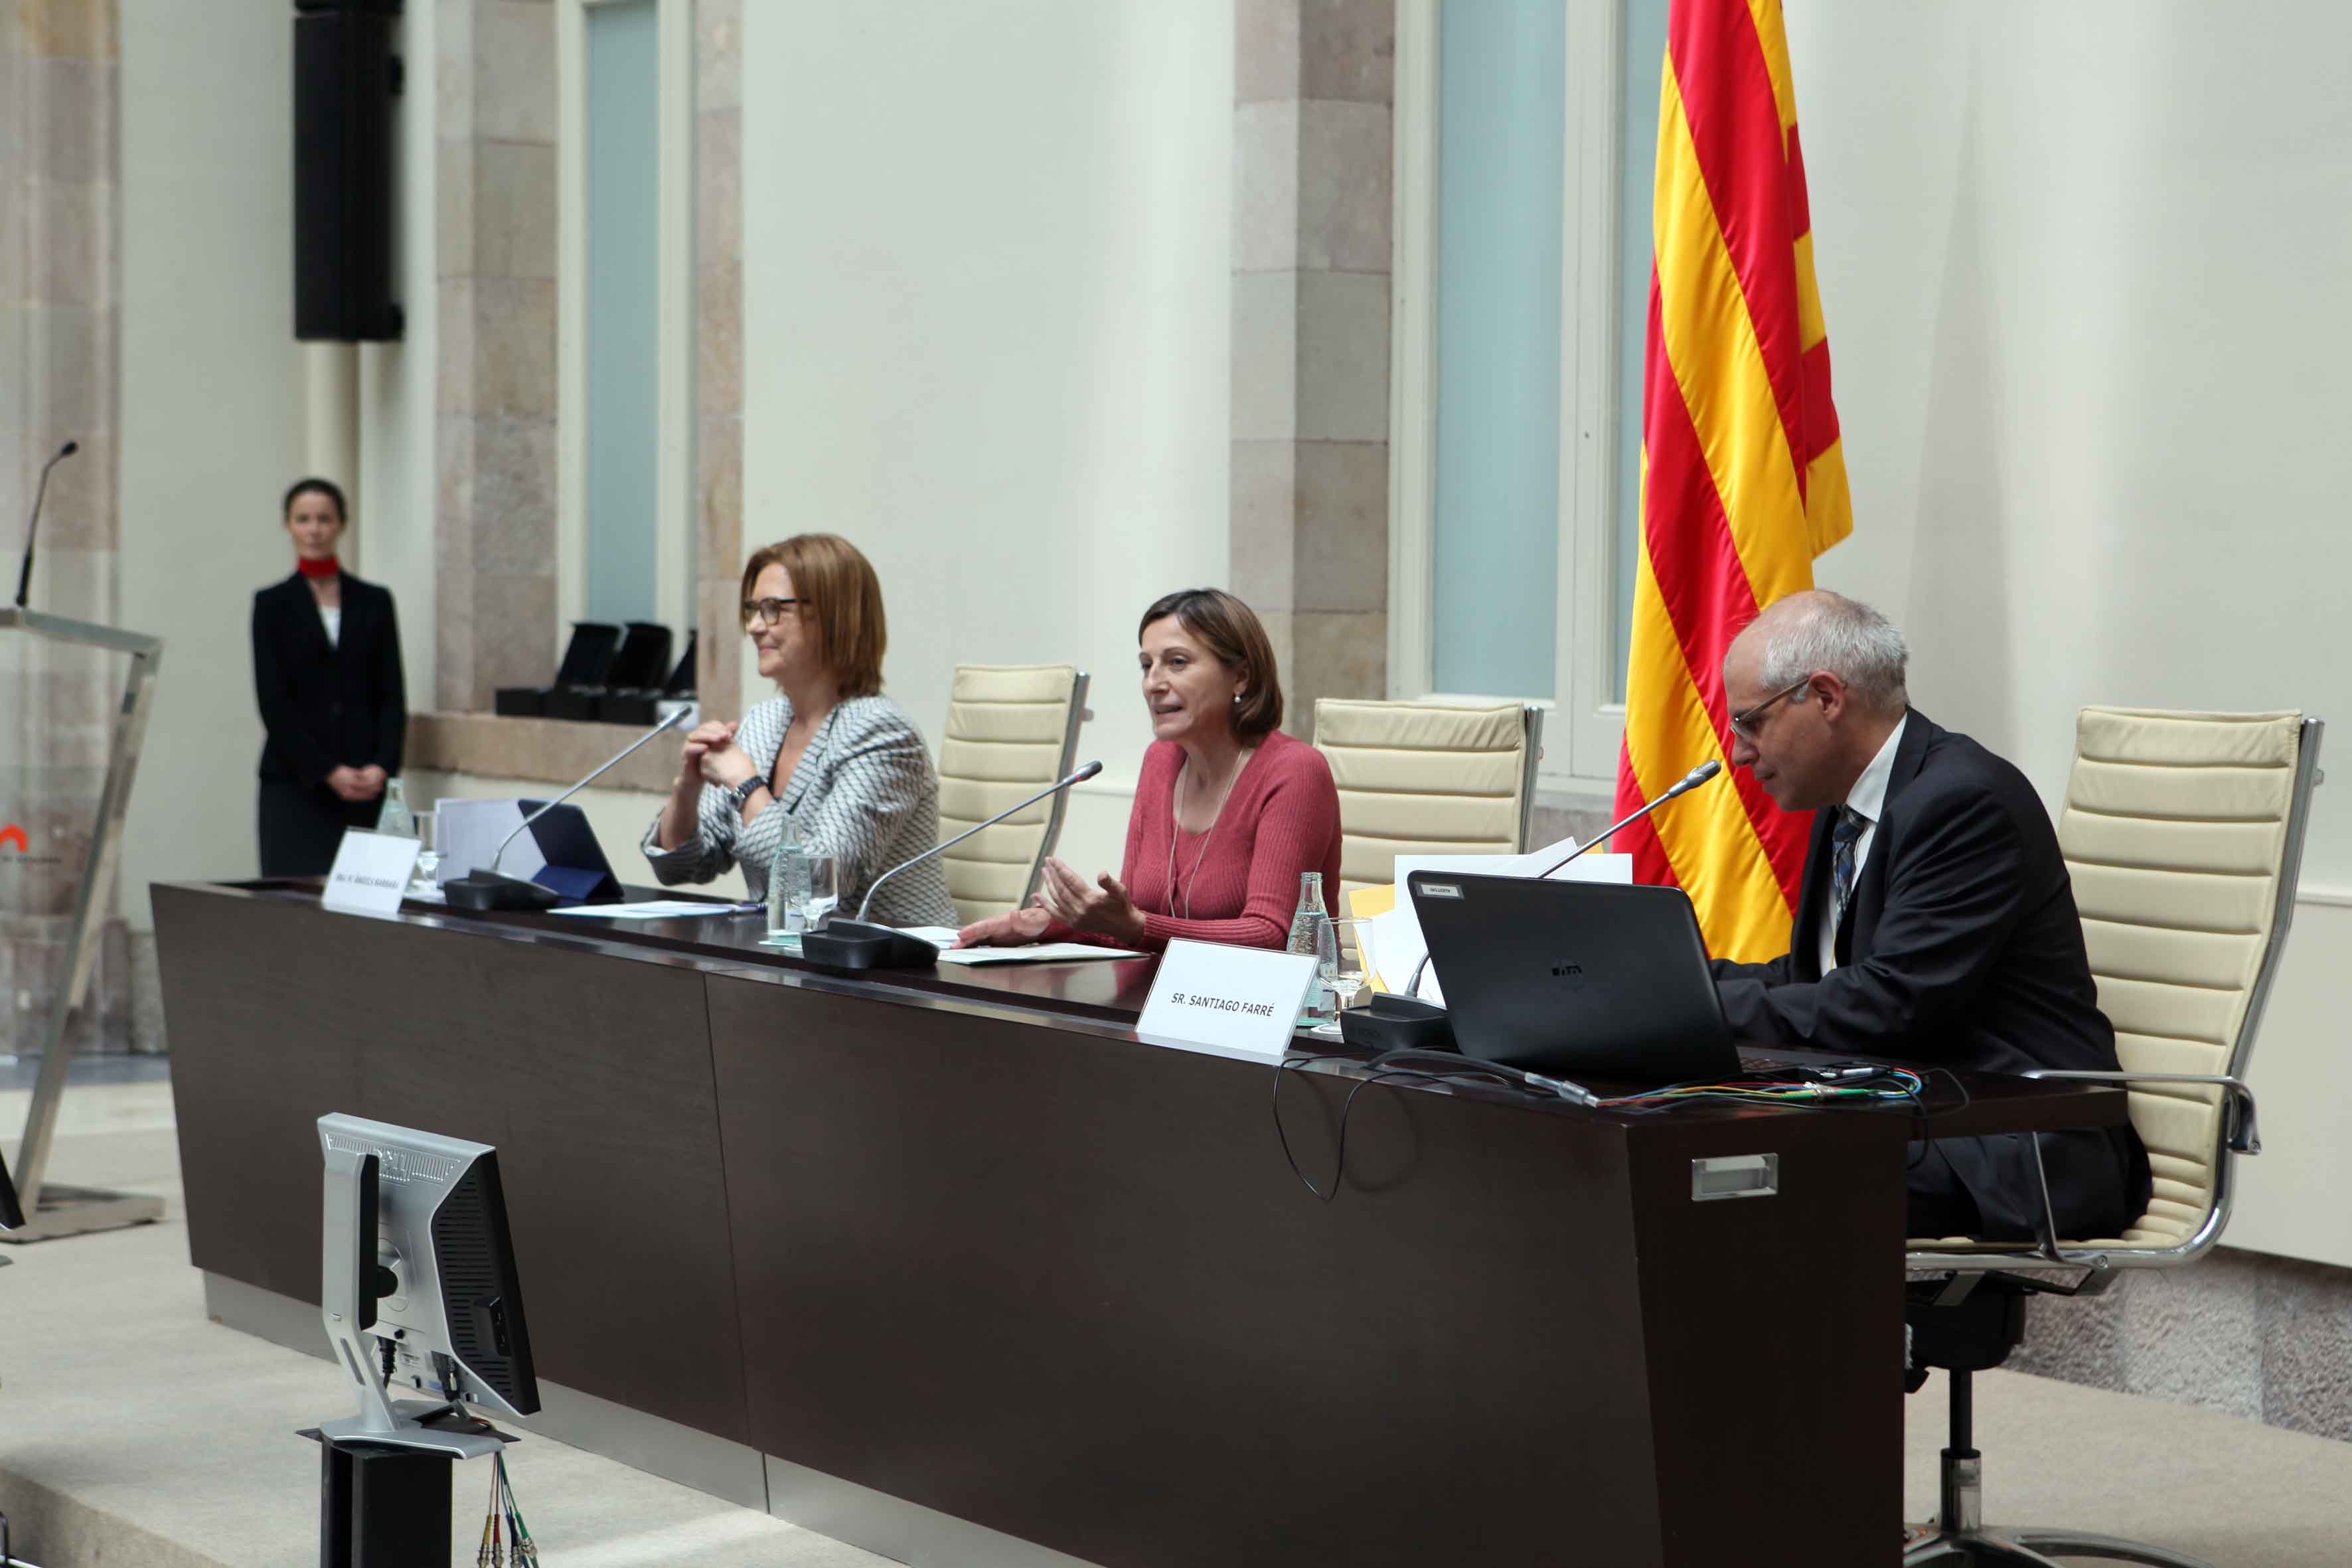 Ms. Maria Àngels Barbarà, Director of the APDCAT, H. Ms. Carme Forcadell, Speaker of the Catalan Parliament and Mr. Santiago Farré, Head of the APDCAT Legal Department.